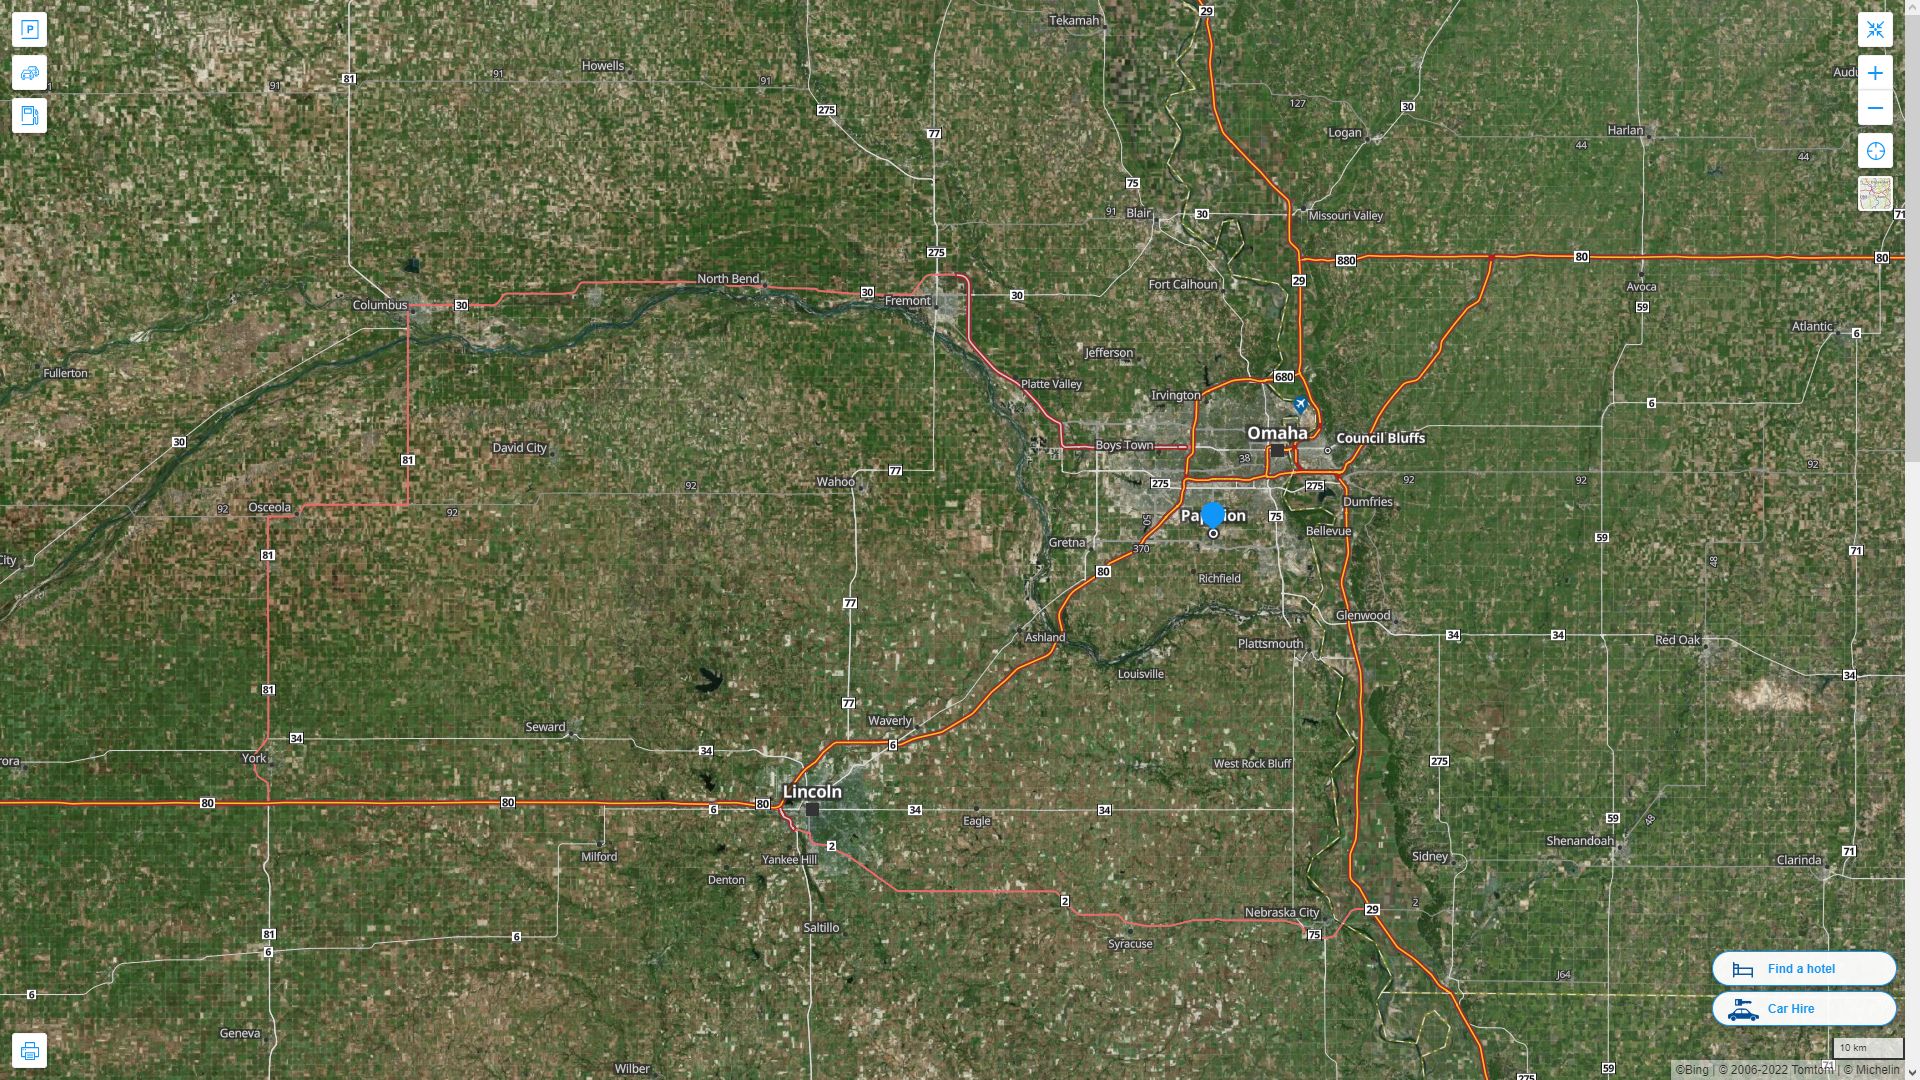 Papillion Nebraska Highway and Road Map with Satellite View